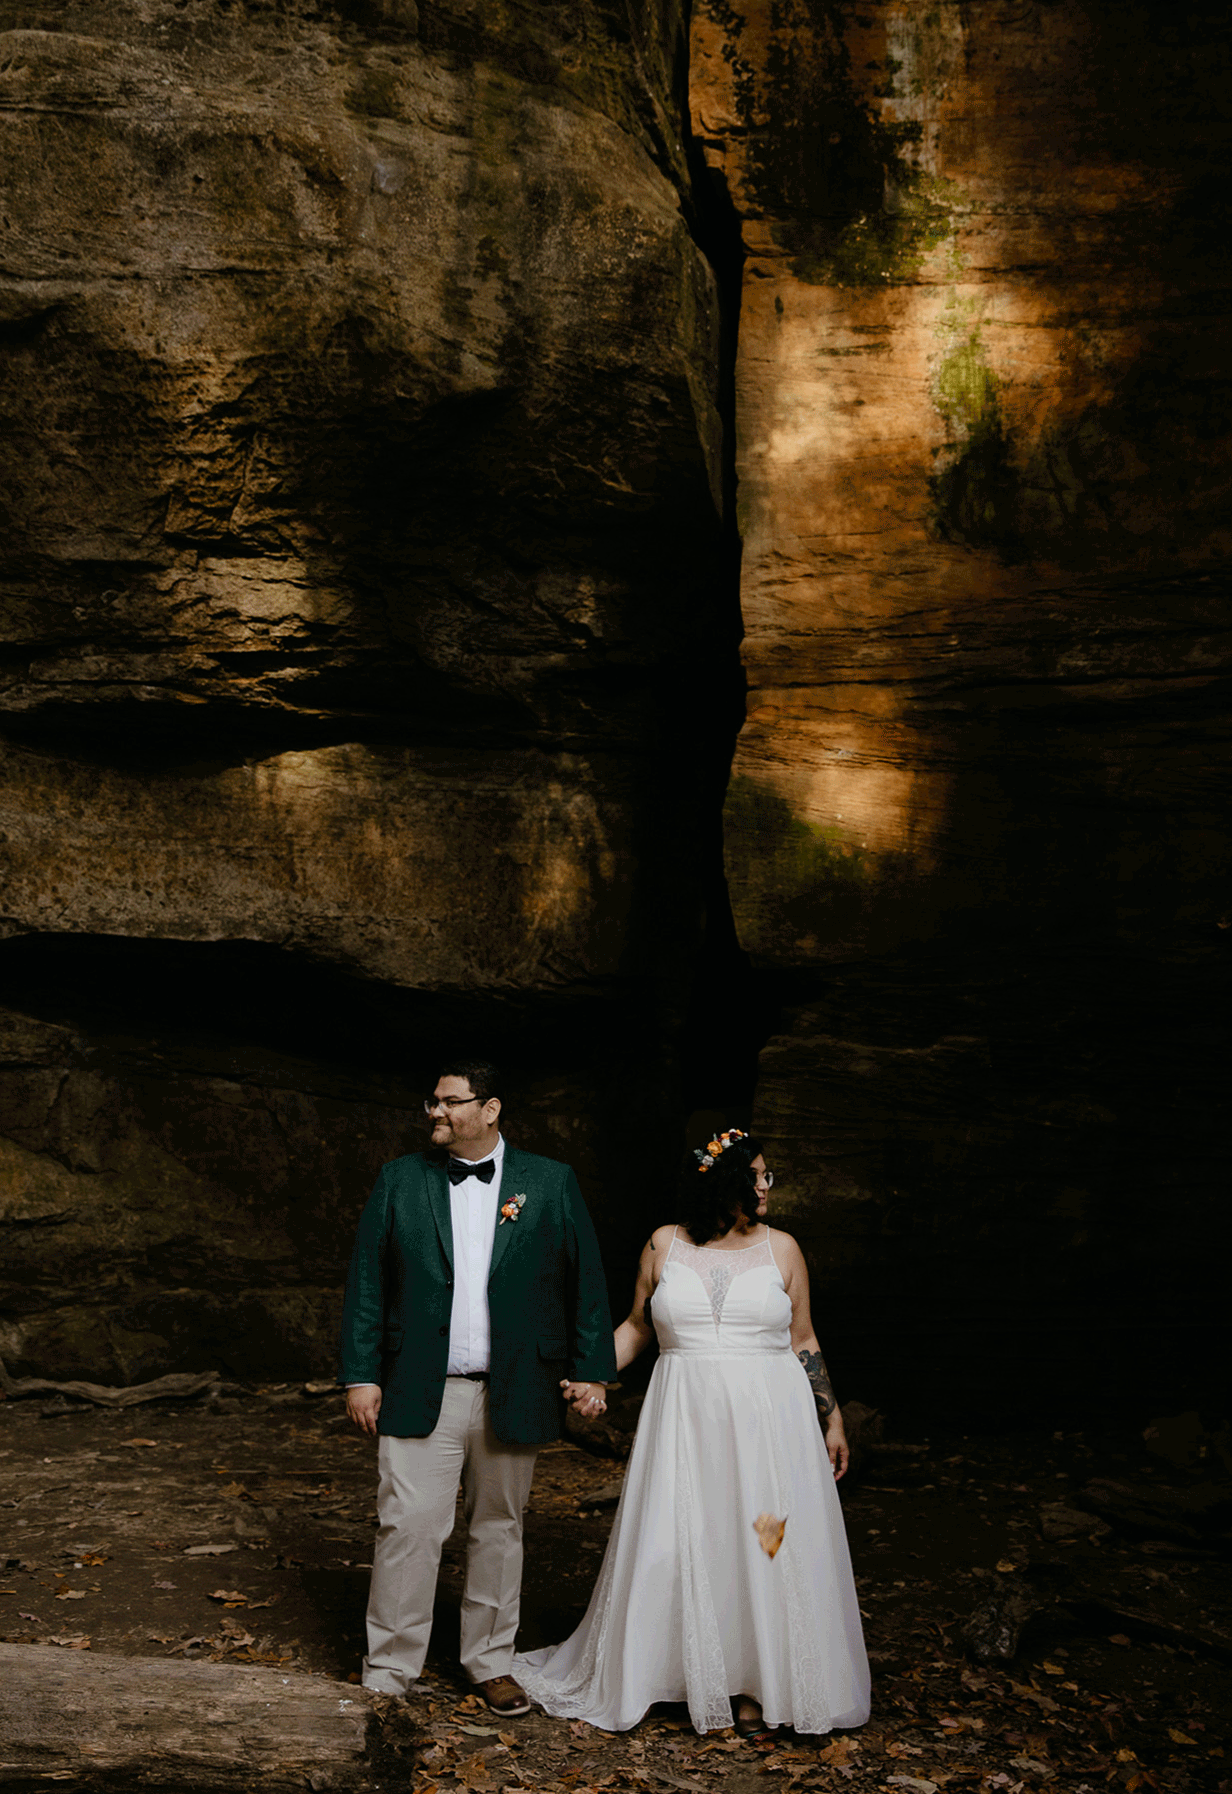 Ope! 7 Best Places to Elope in the Midwest - Turkey Run, Indiana Elopement in Fall